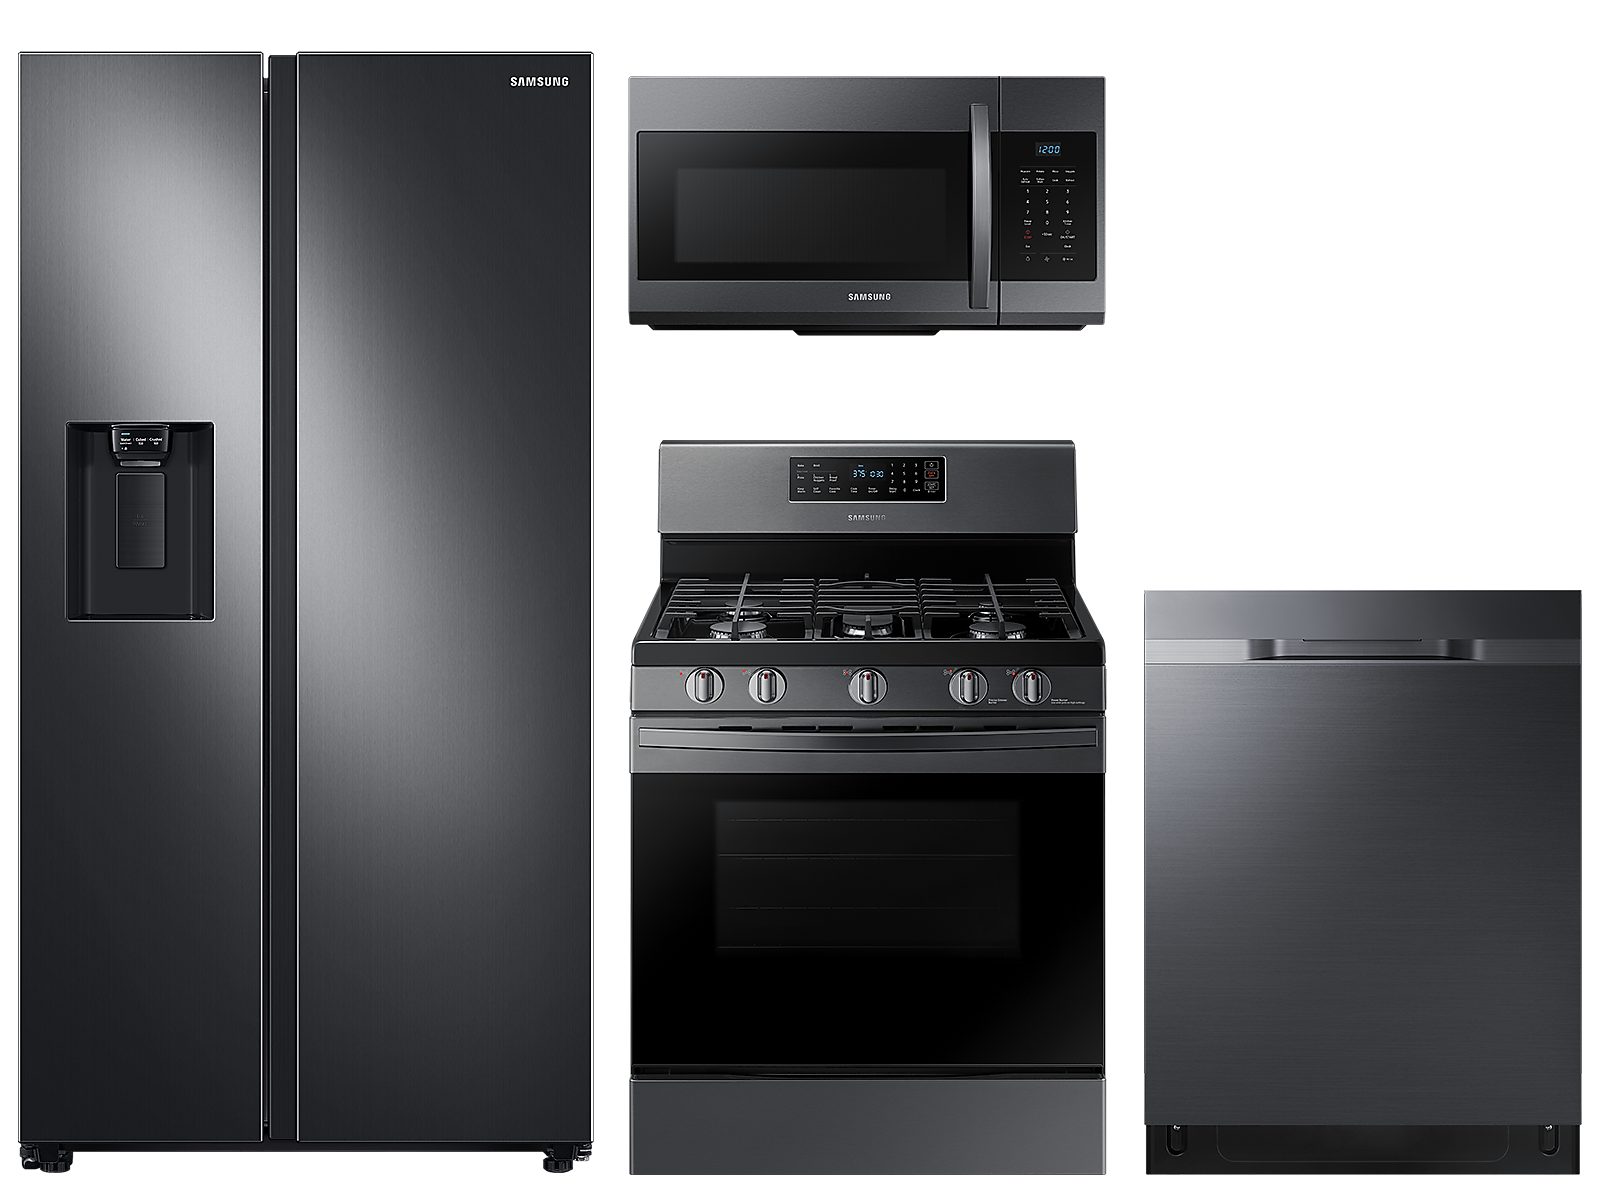 Samsung Large capacity Side-by-Side refrigerator & gas range package in Black stainless(BNDL-1646991127721) photo